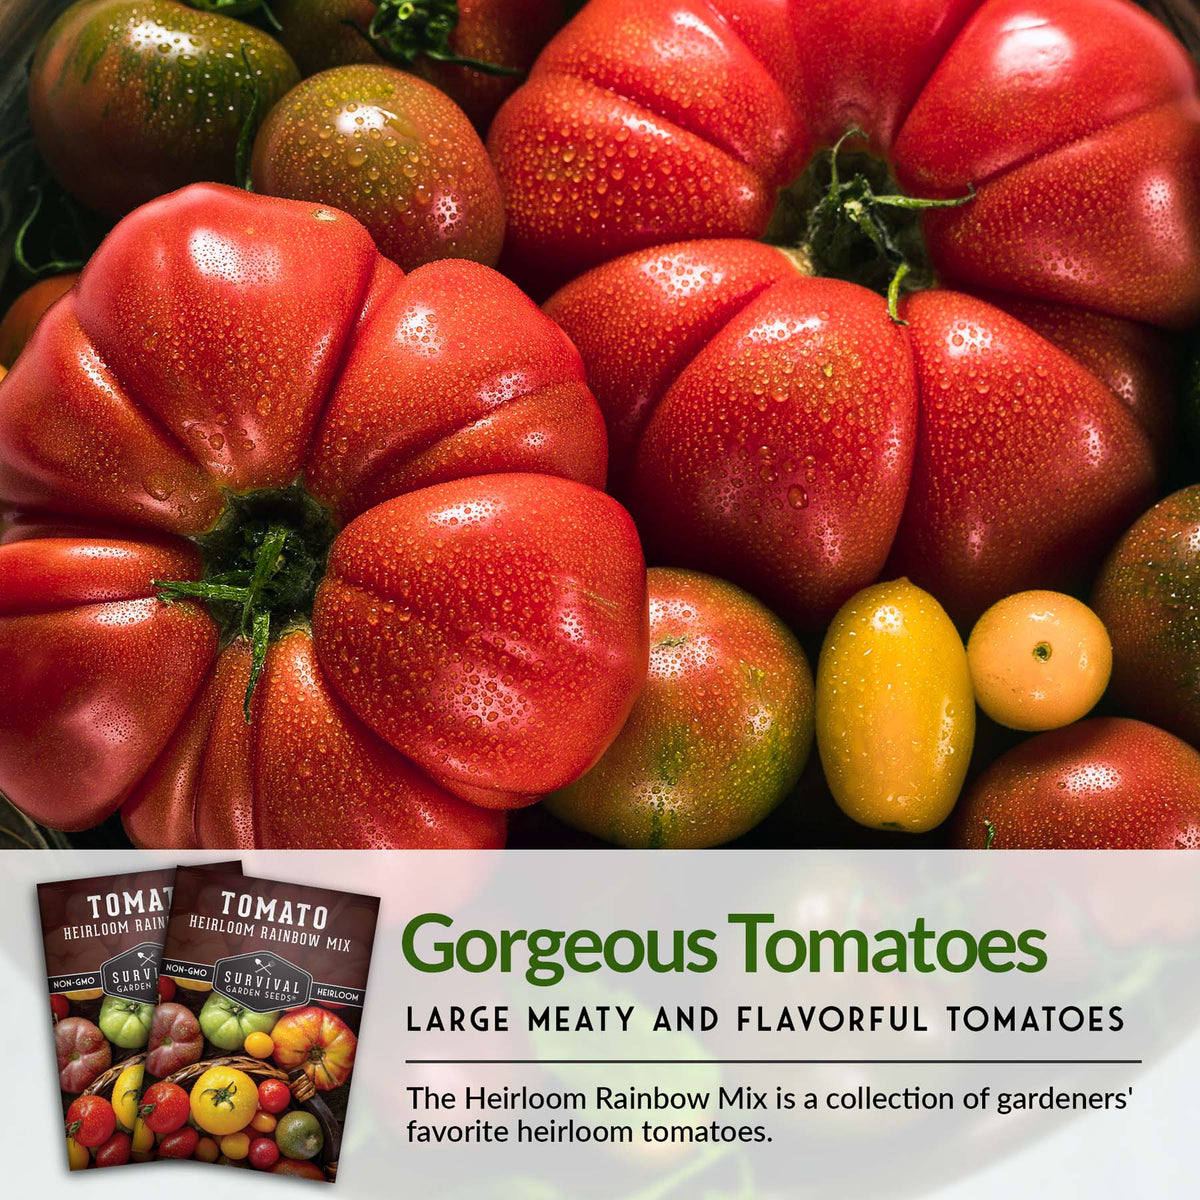 Heirloom tomatoes are large, meaty and flavorful